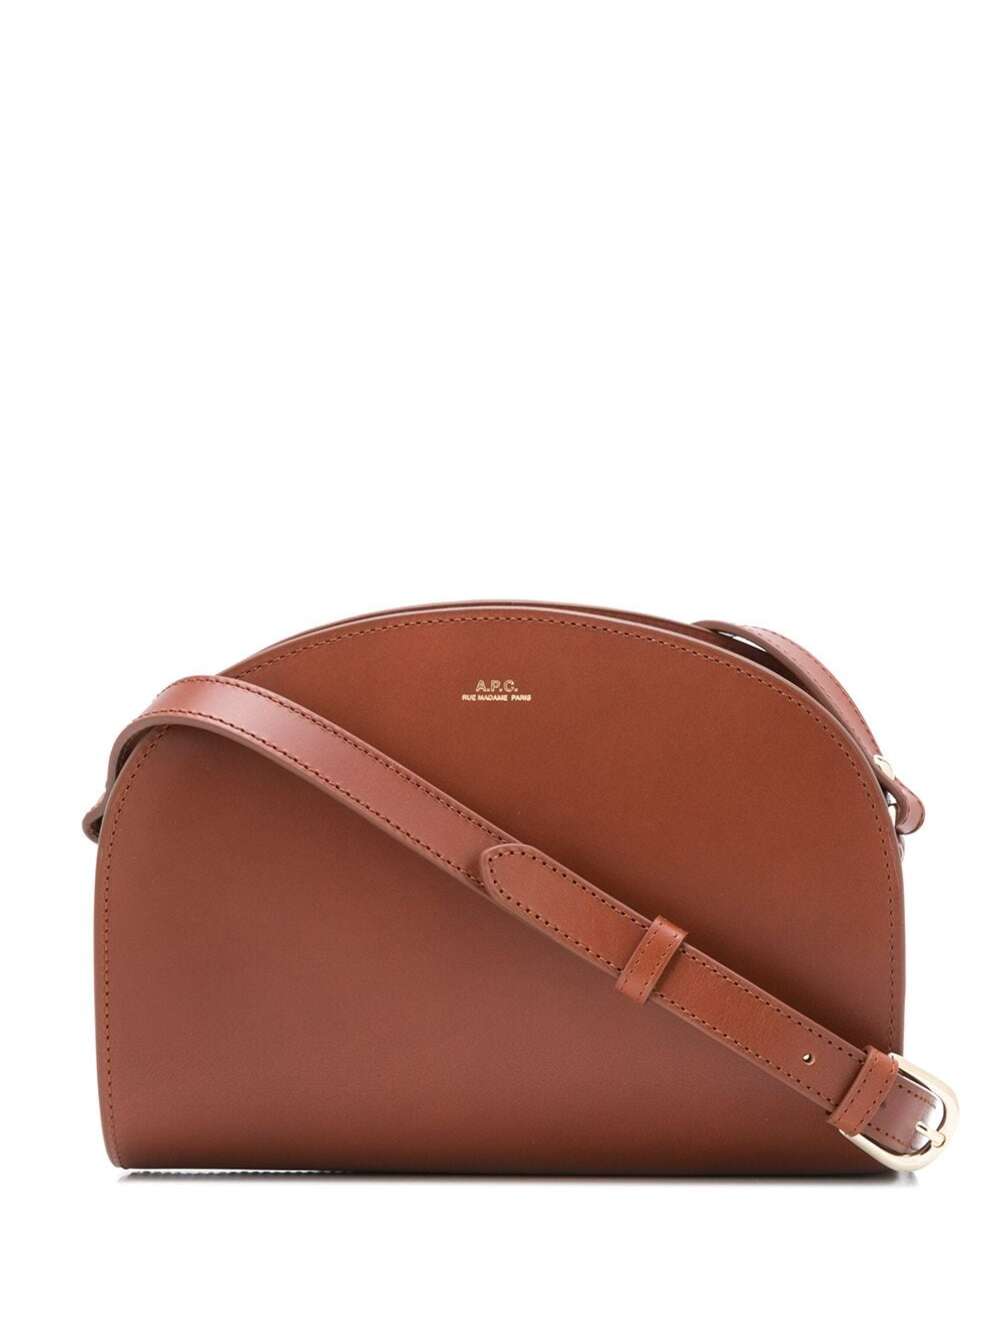 A.p.c. Womans Sac Demi Lune Brown Leather Crossbody Bag